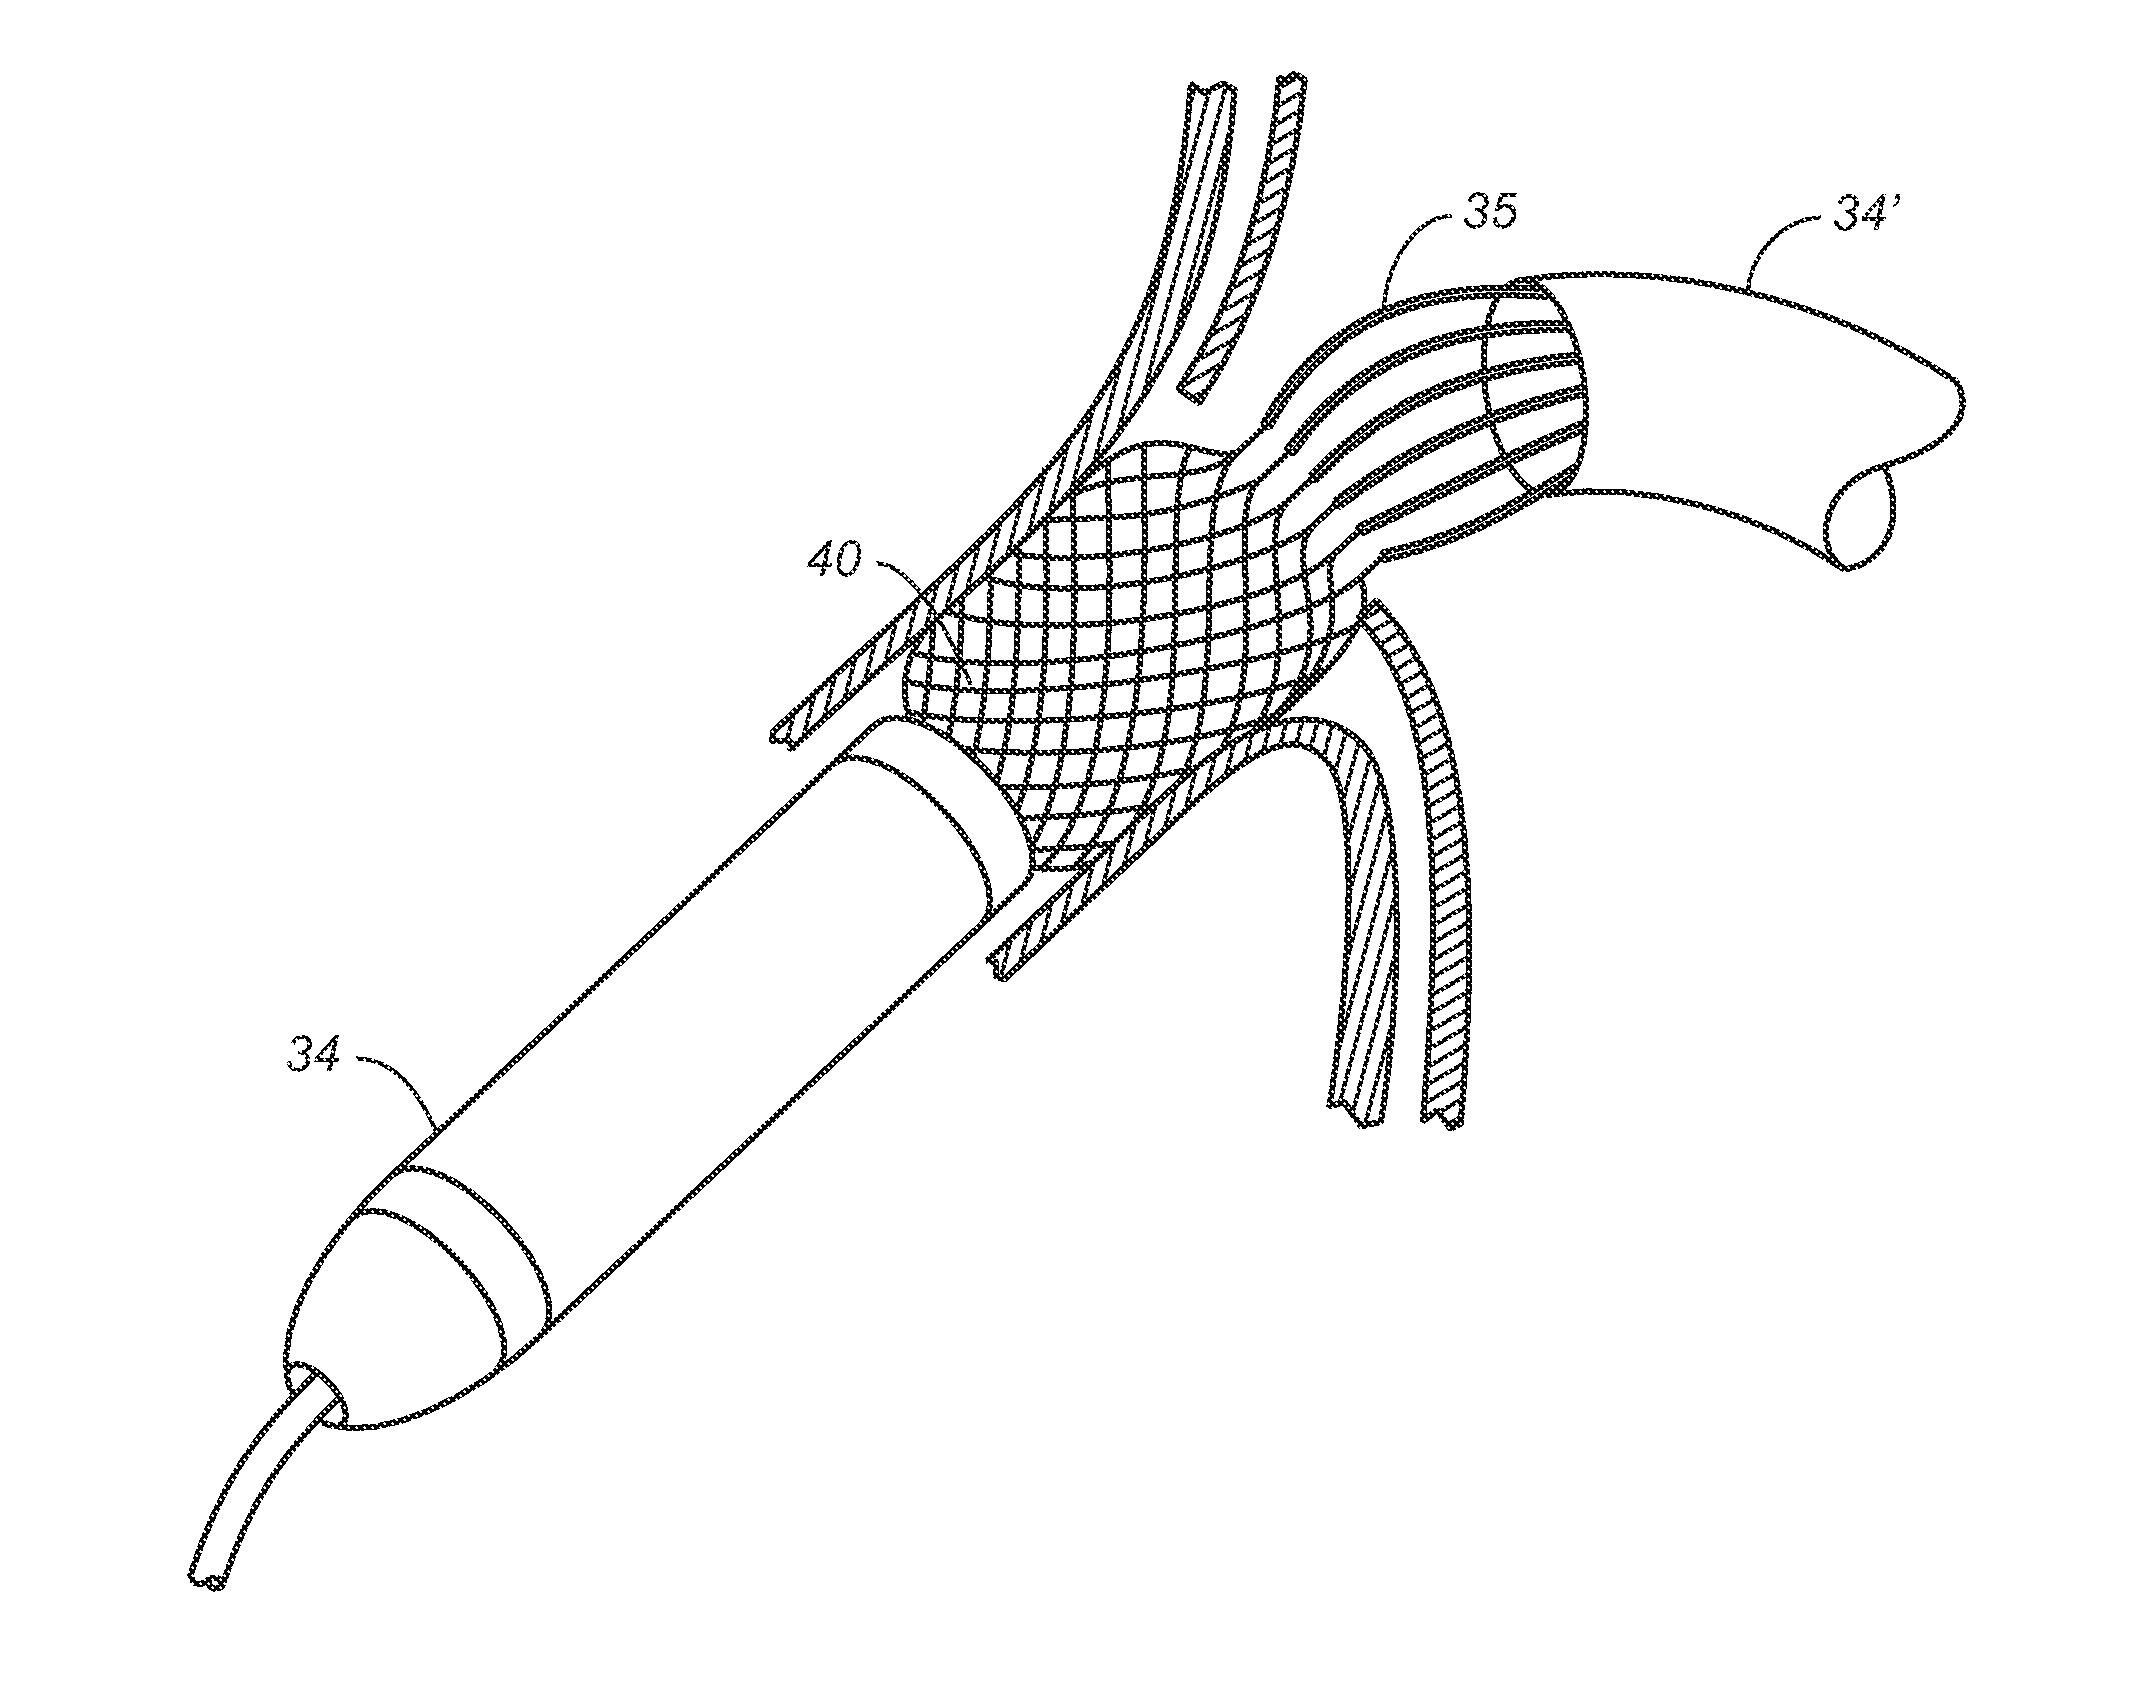 Branch Vessel Suture Stent System and Method